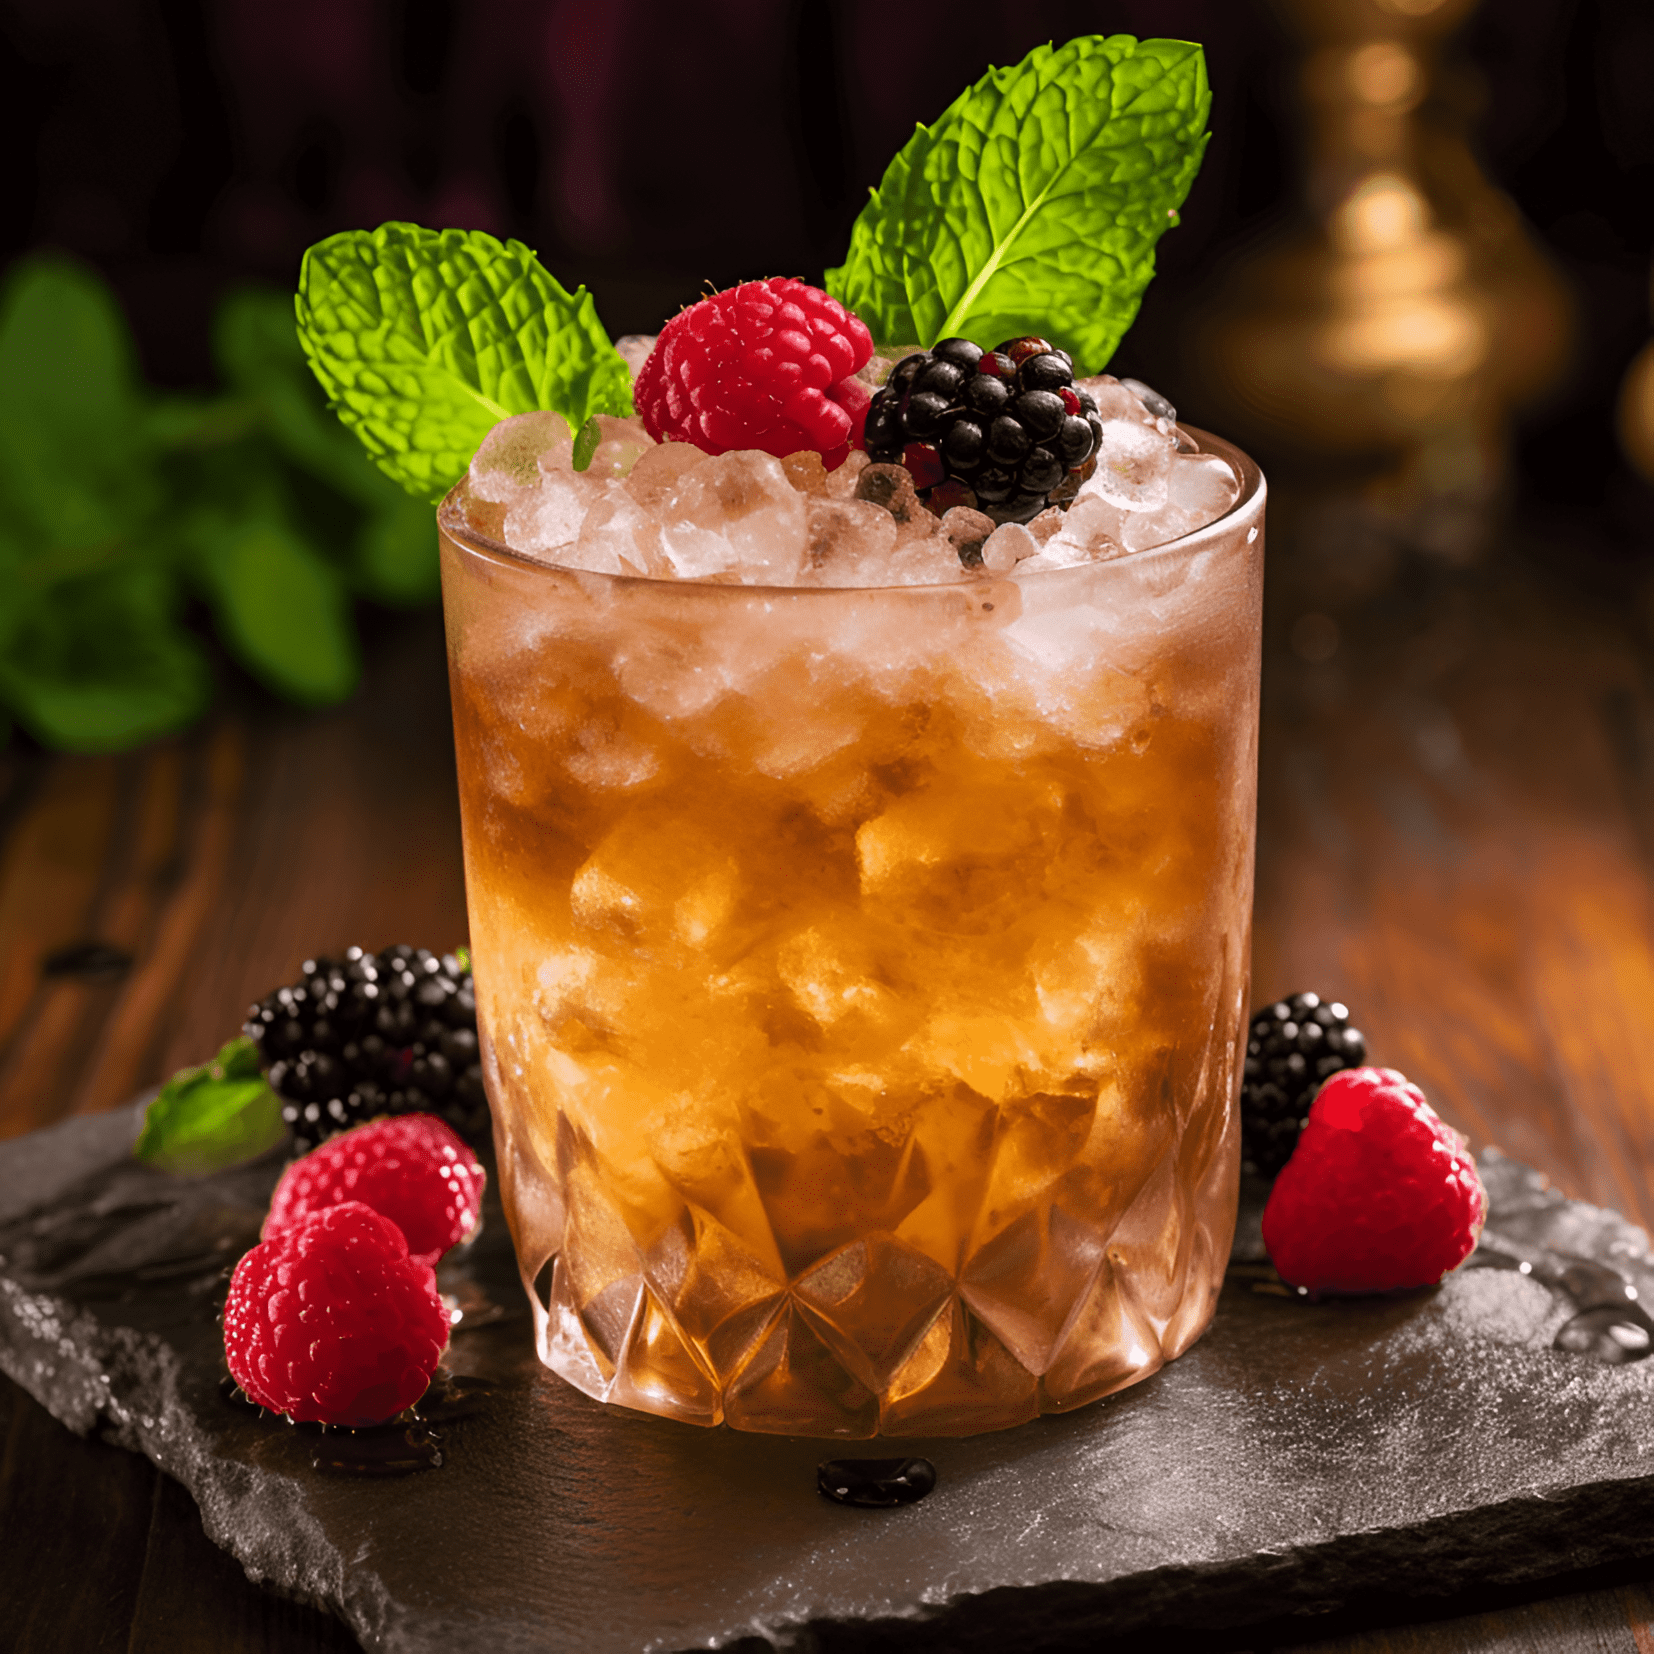 The Sherry Cobbler has a refreshing, fruity, and slightly sweet taste with a hint of nuttiness from the sherry. The citrus notes from the orange and lemon add a pleasant tartness, while the sugar and crushed ice create a smooth and well-balanced flavor.